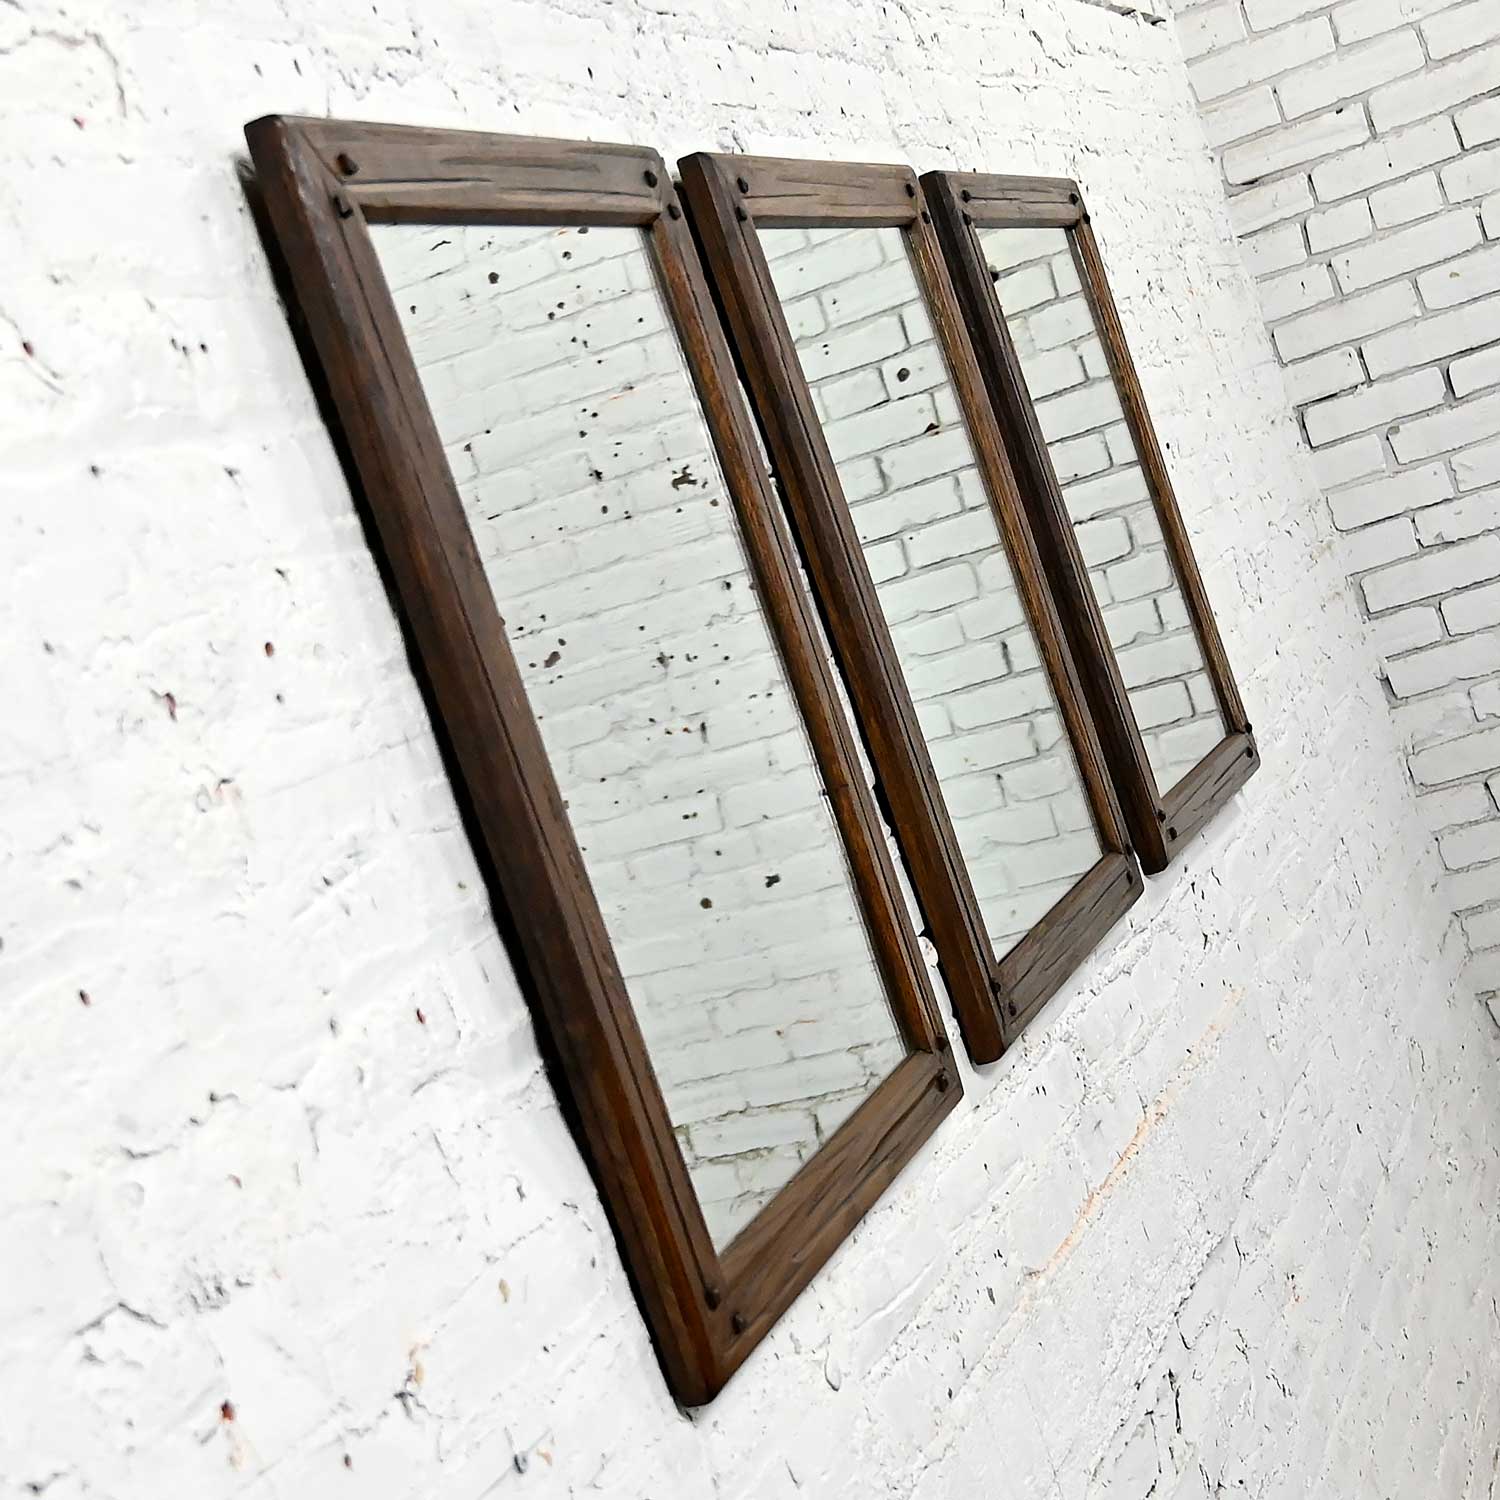 Three Vintage Mirrors by A. Brandt for Ranch Oak Acorn Brown Finish Sold Separately